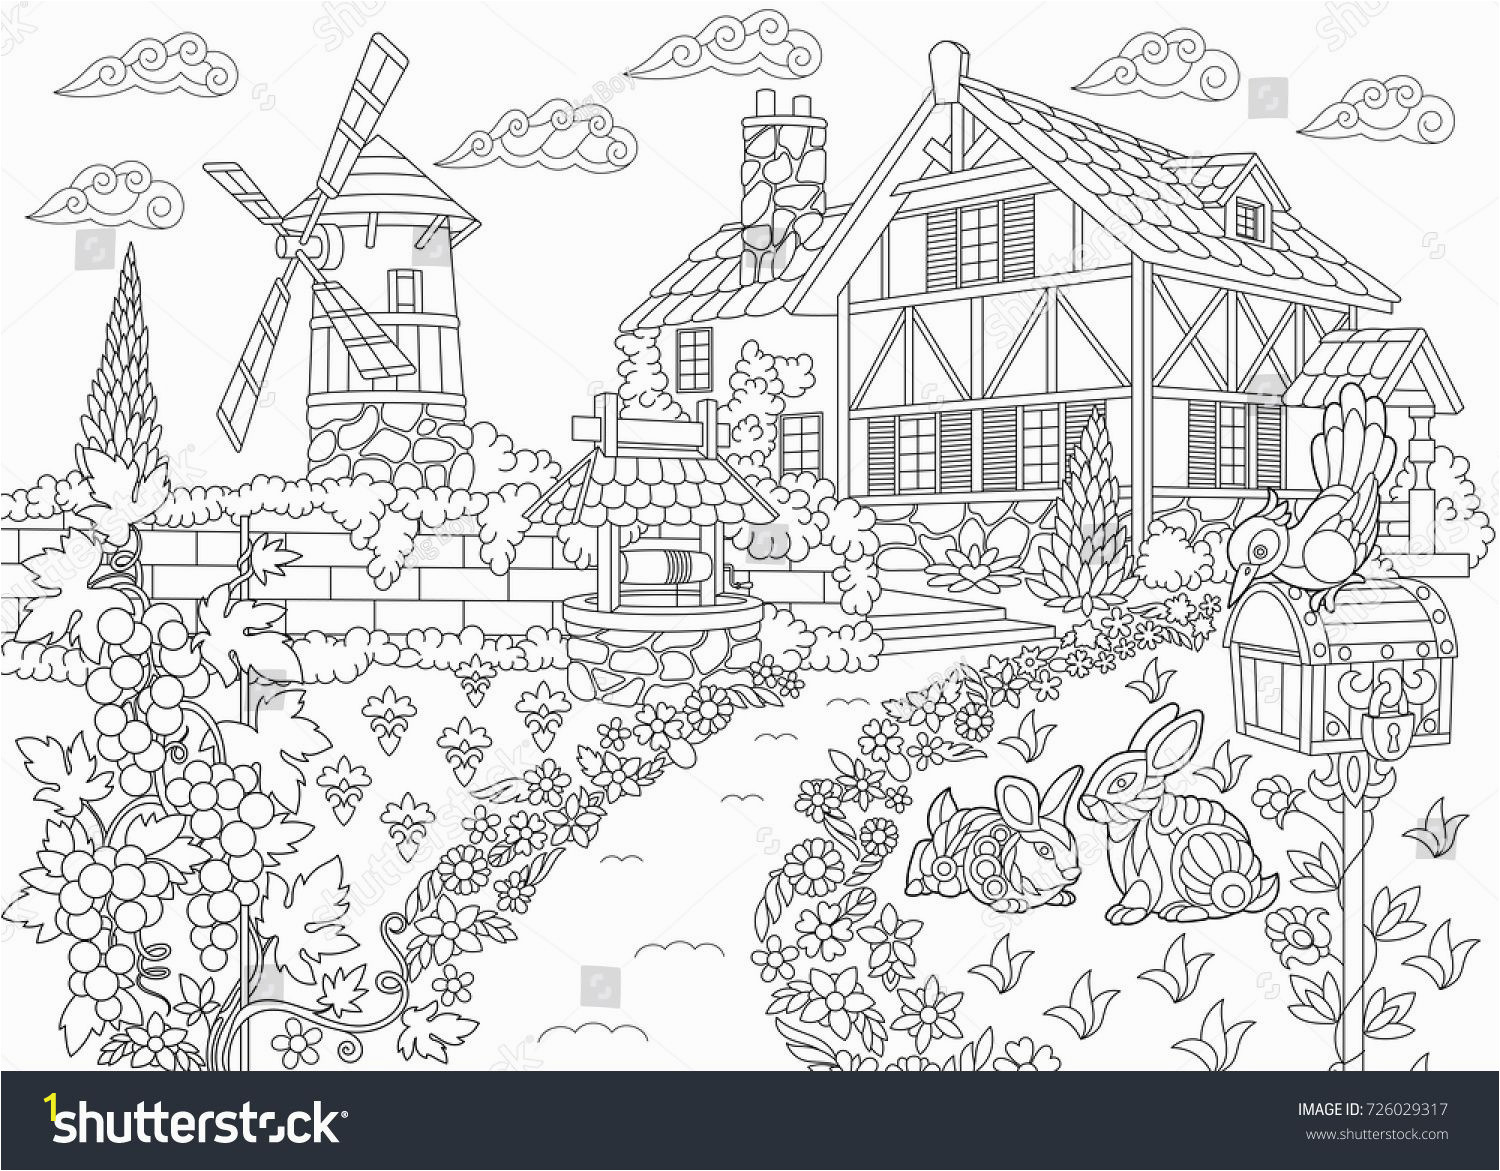 Dream House Coloring Pages Coloring Page for Kids Gingerbread House Coloring Pages